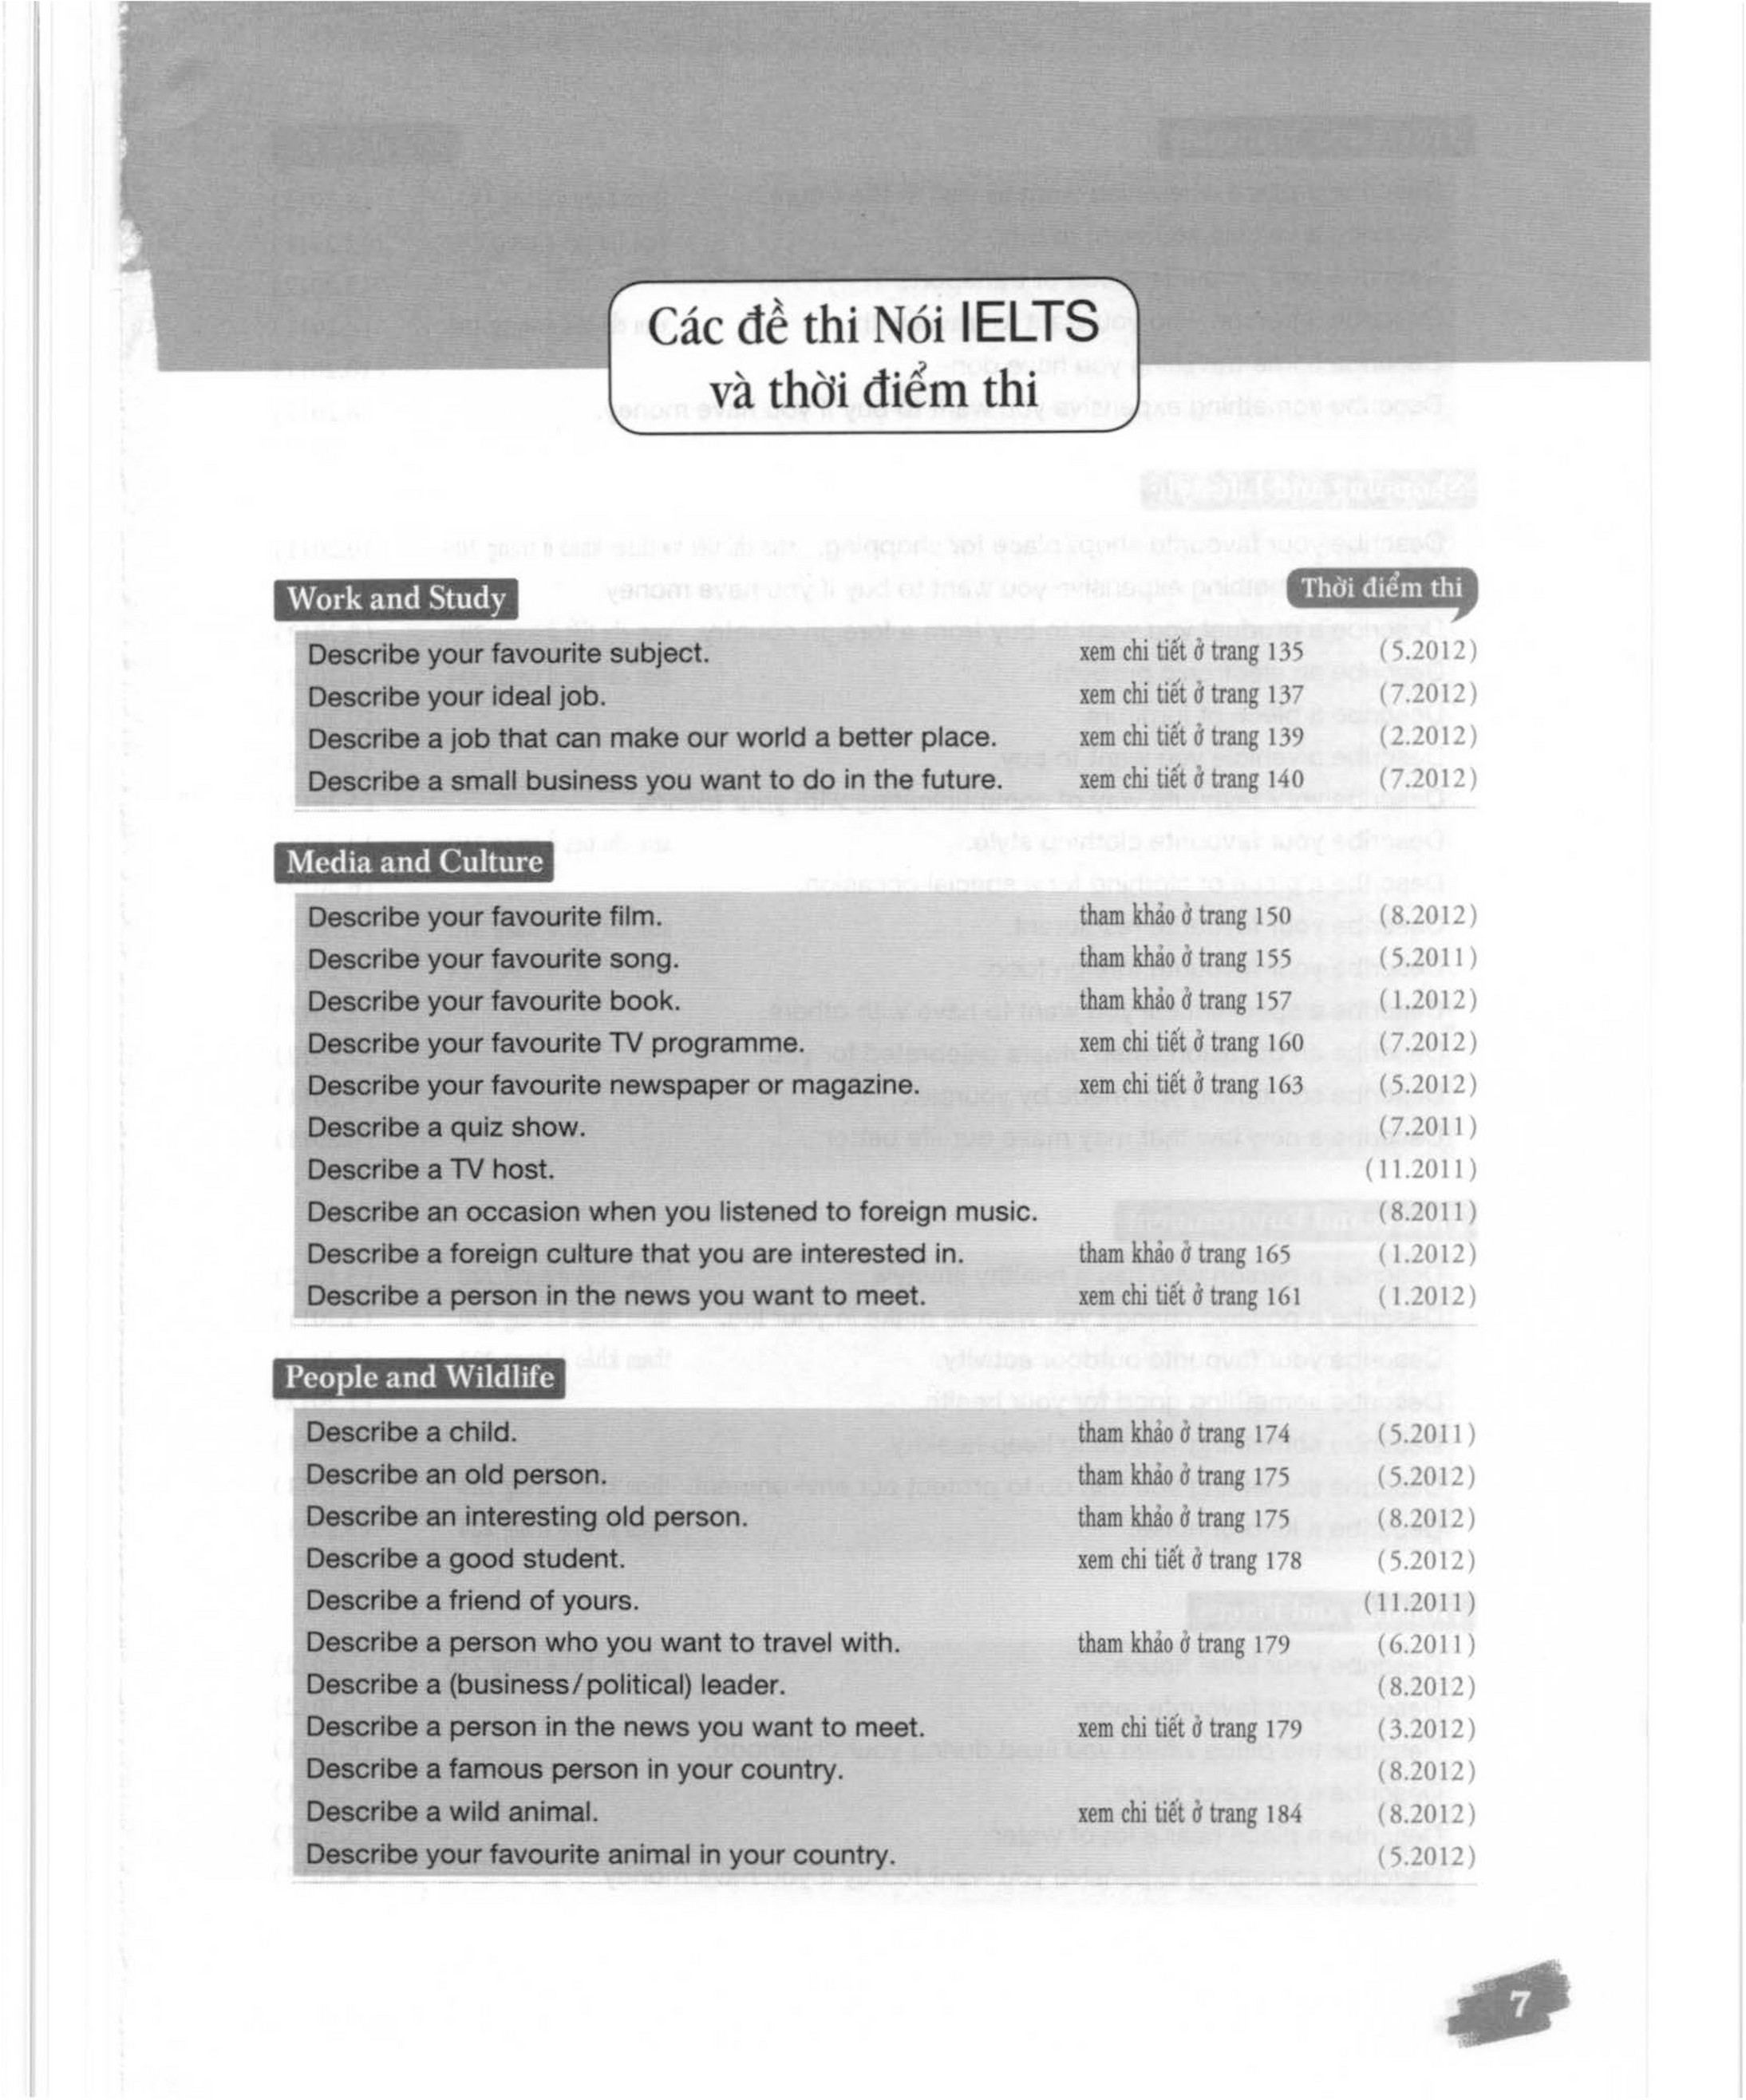 IELTS Speaking - Recent Actual Tests & Suggested Answers - Page 6-7 -  Created with 